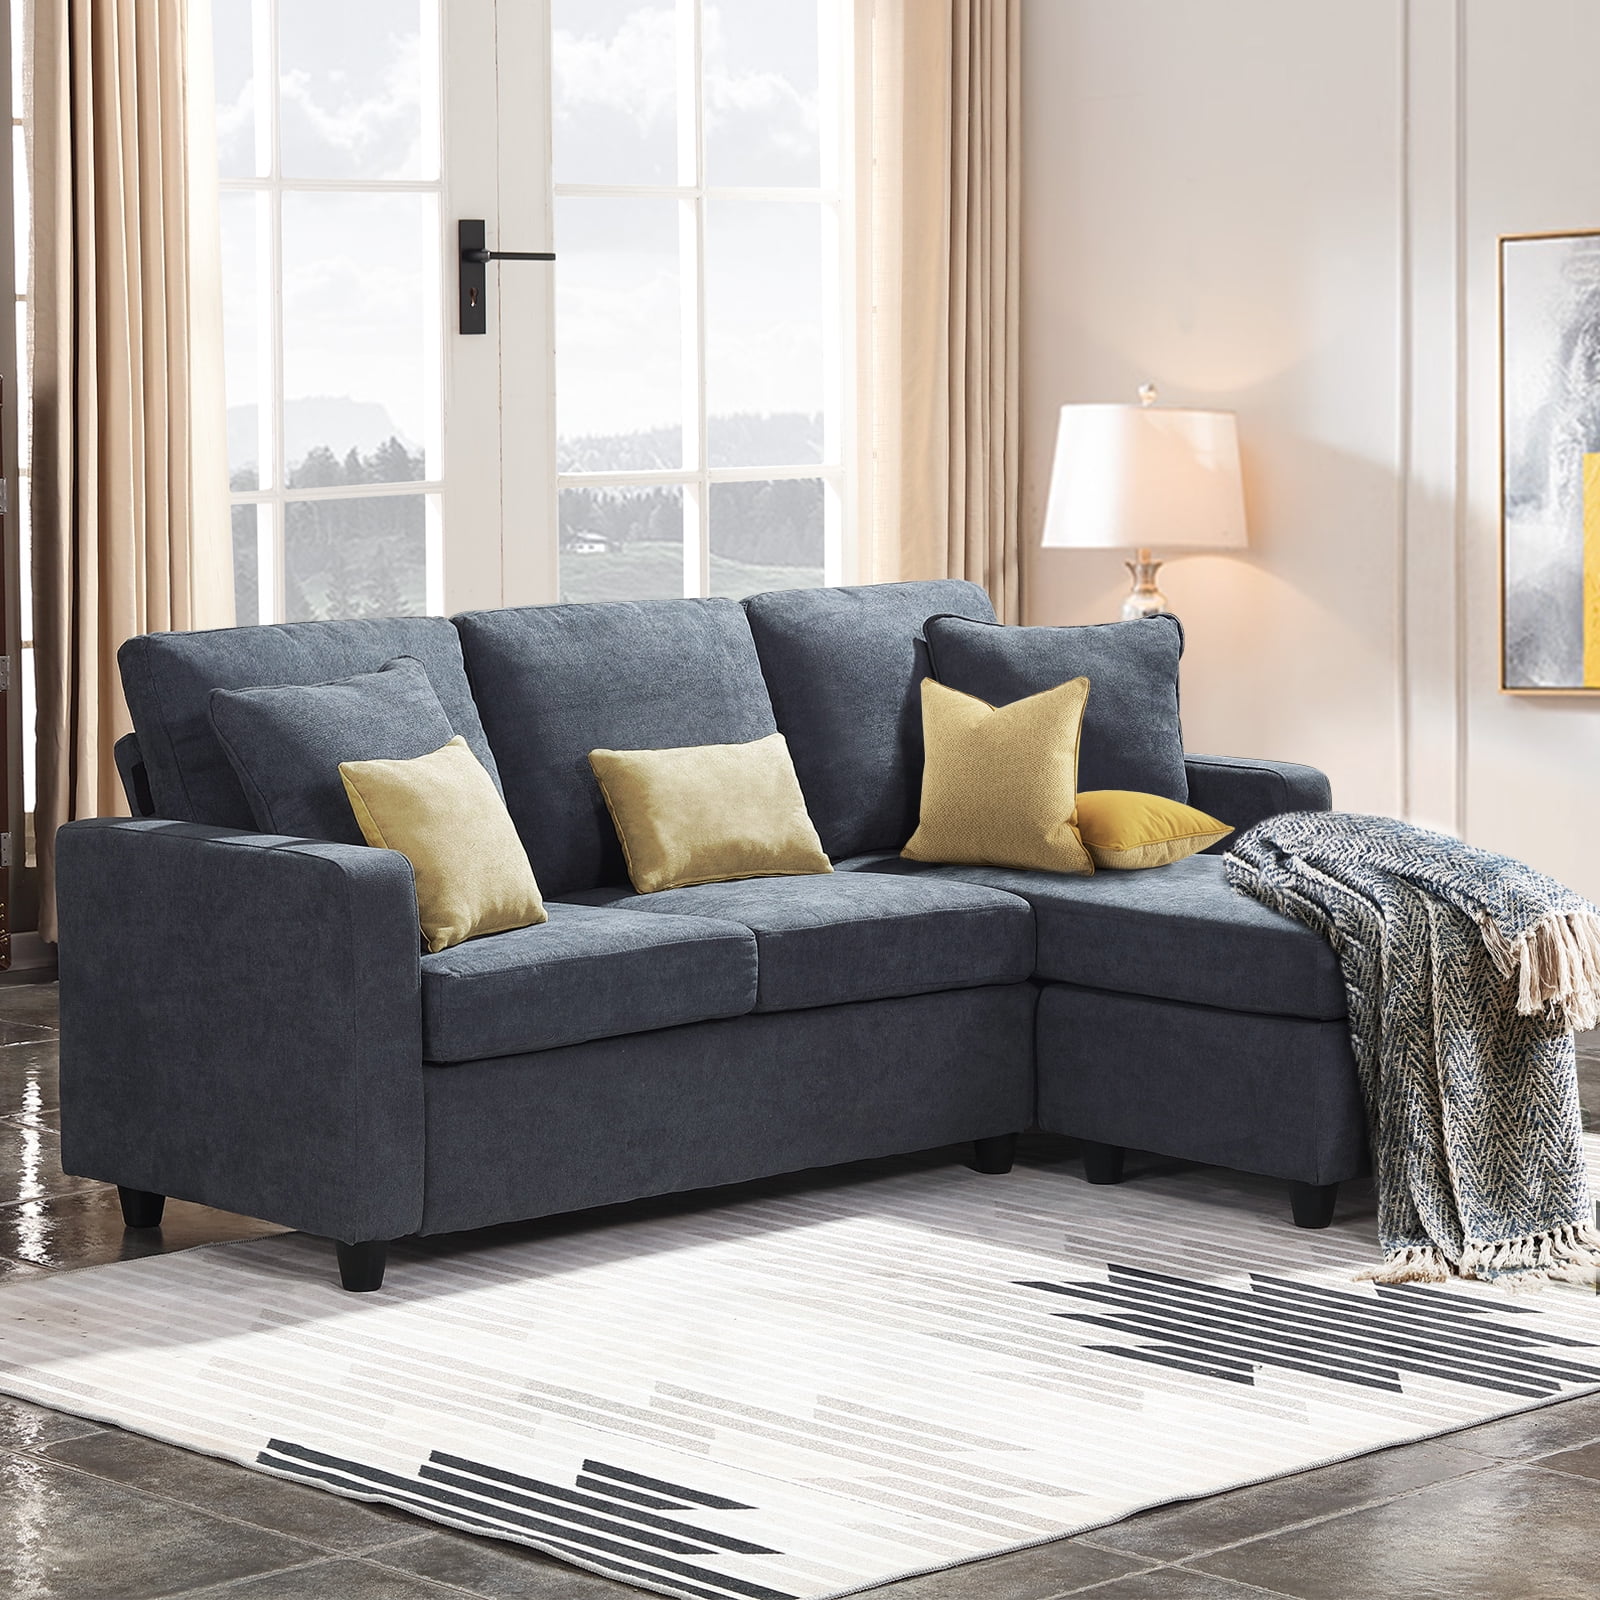 Honbay Convertible Sectional Sofa Couch, Honbay L Shape Couch Bed Sofa Reversible Sleeper